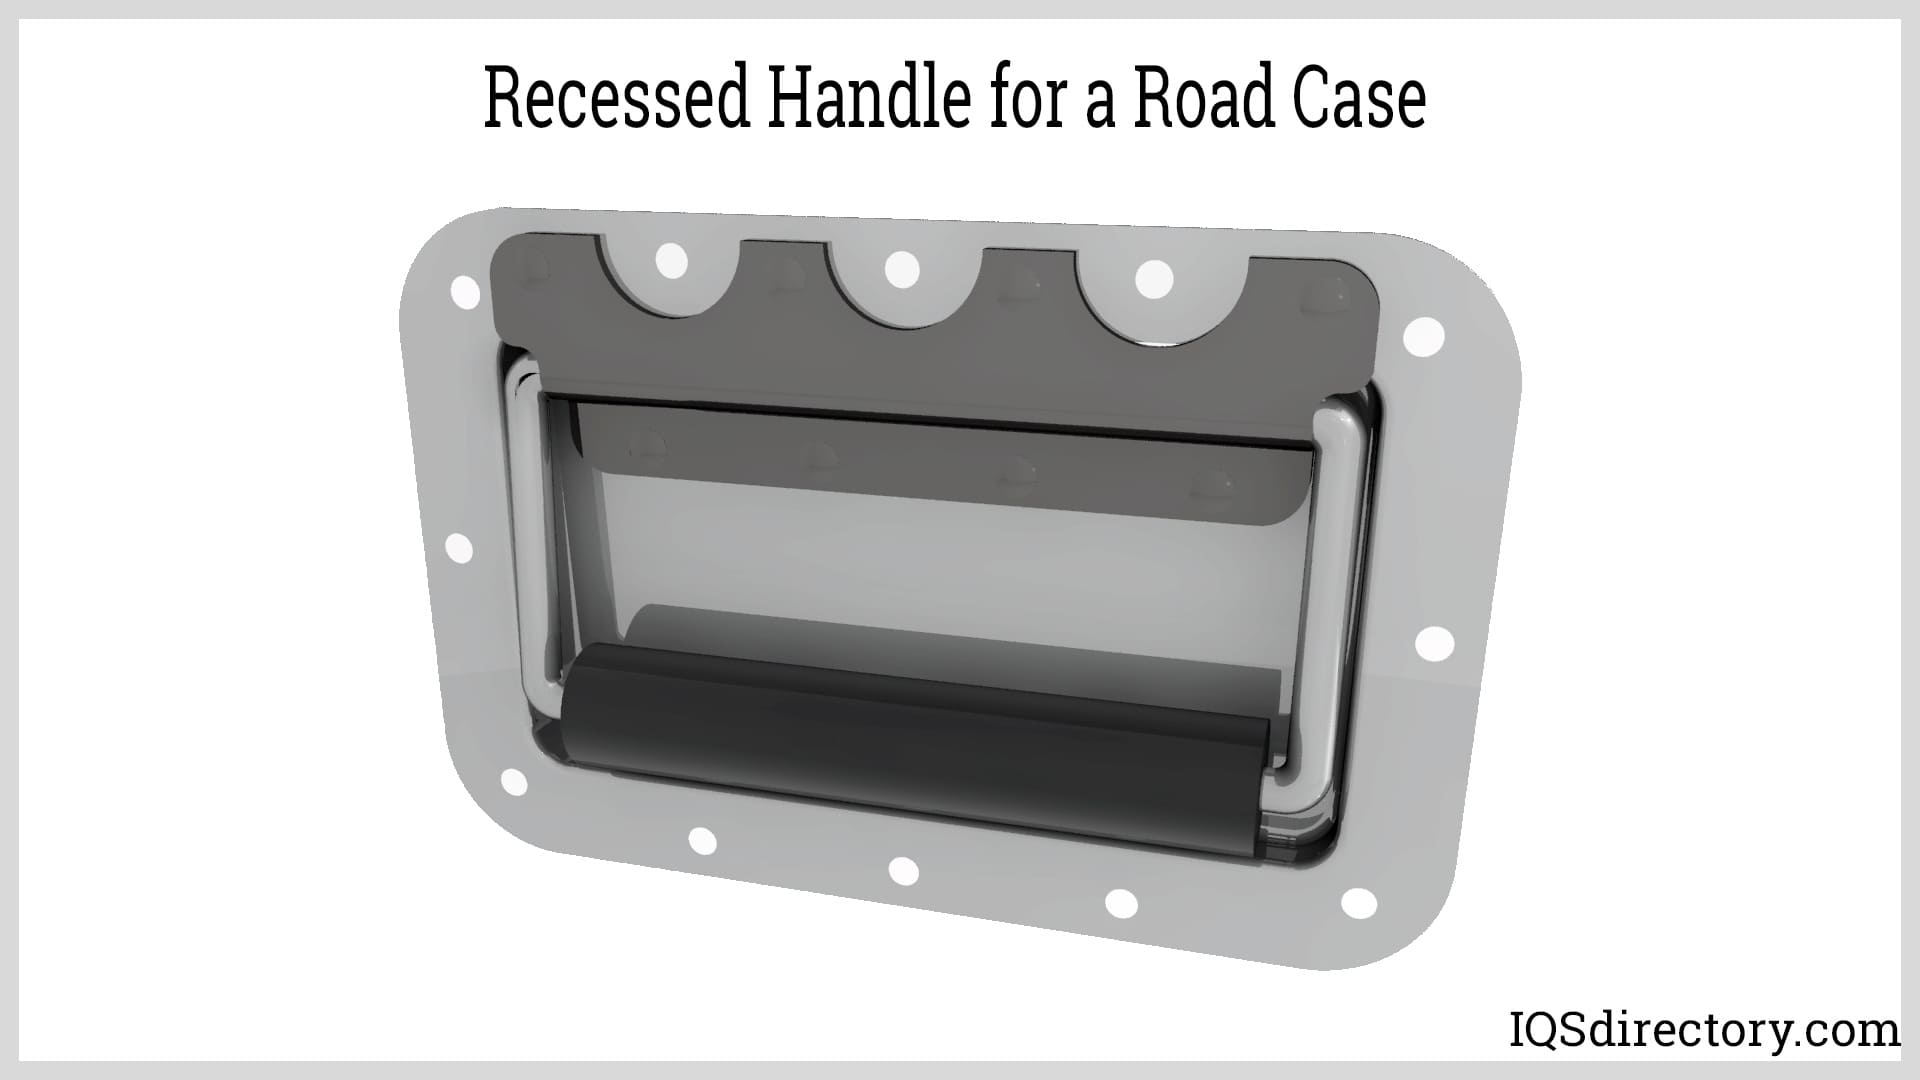 Recessed Handle for a Road Case